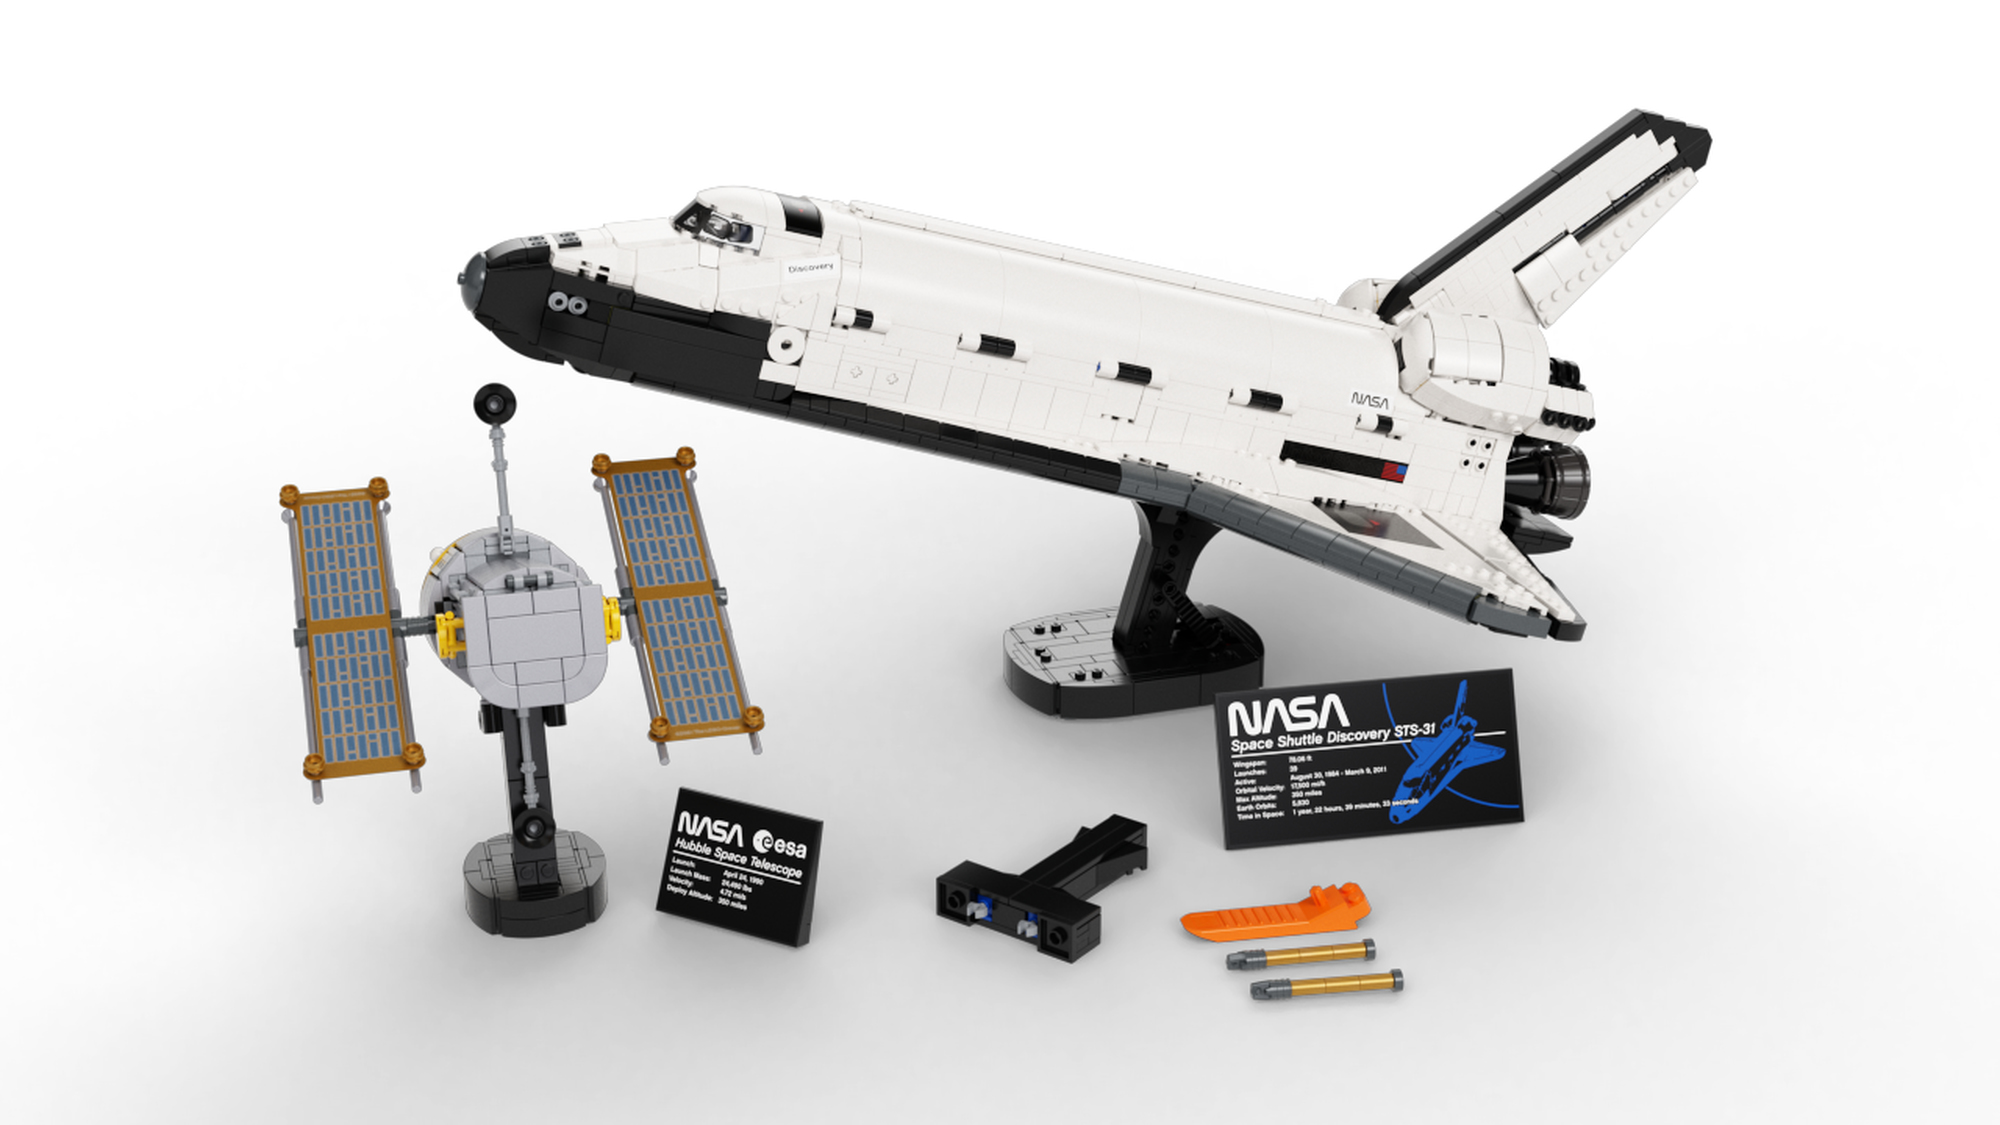 LEGO NASA Space Shuttle Discovery 10283 Building Kit (2,354 Pcs)